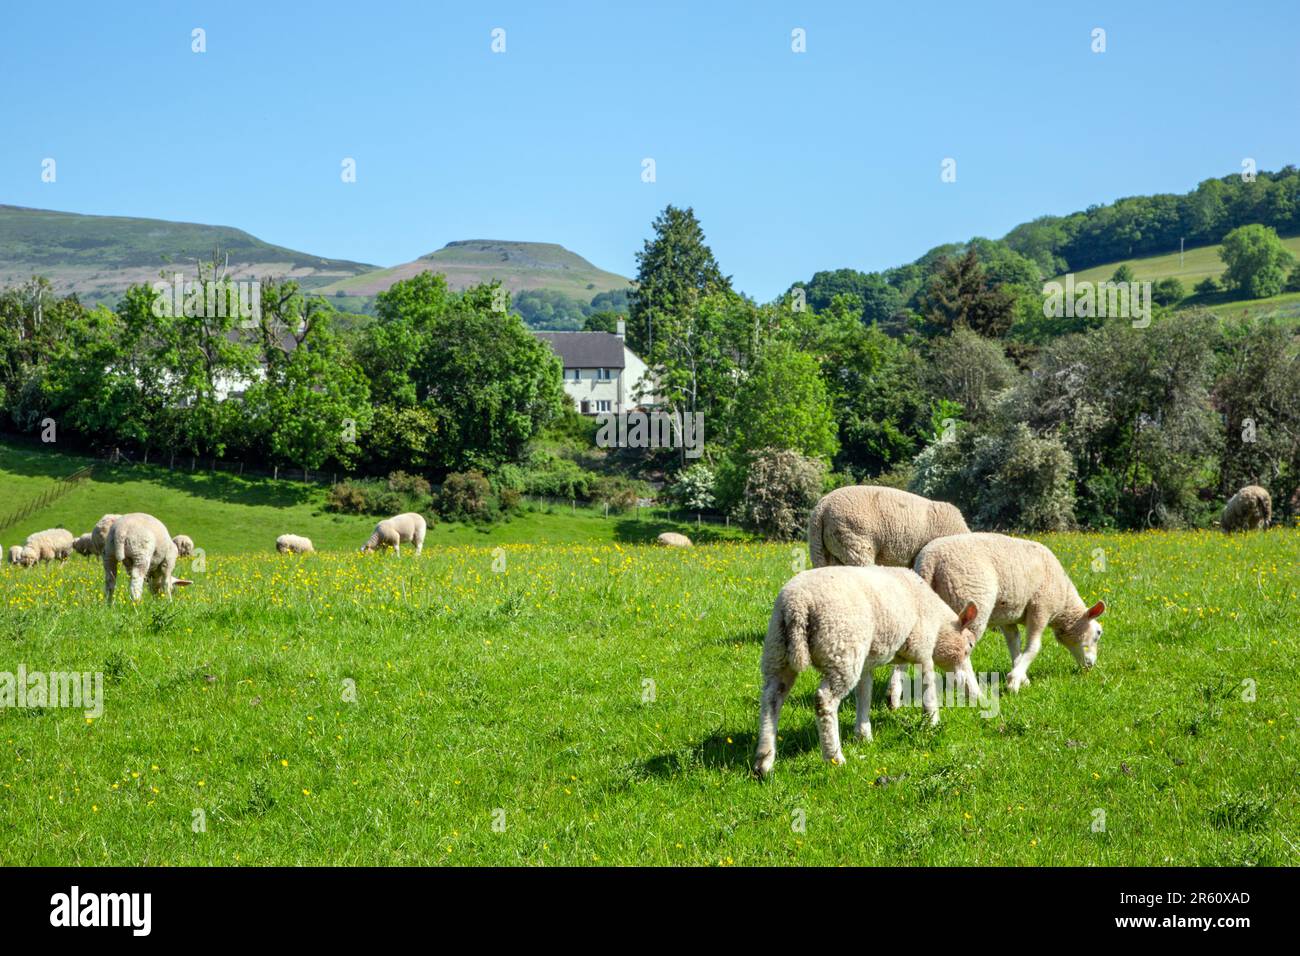 Sheep grazing in farmland meadows at Crickhowell Powys South Wales, with table Mountain high above the town Stock Photo